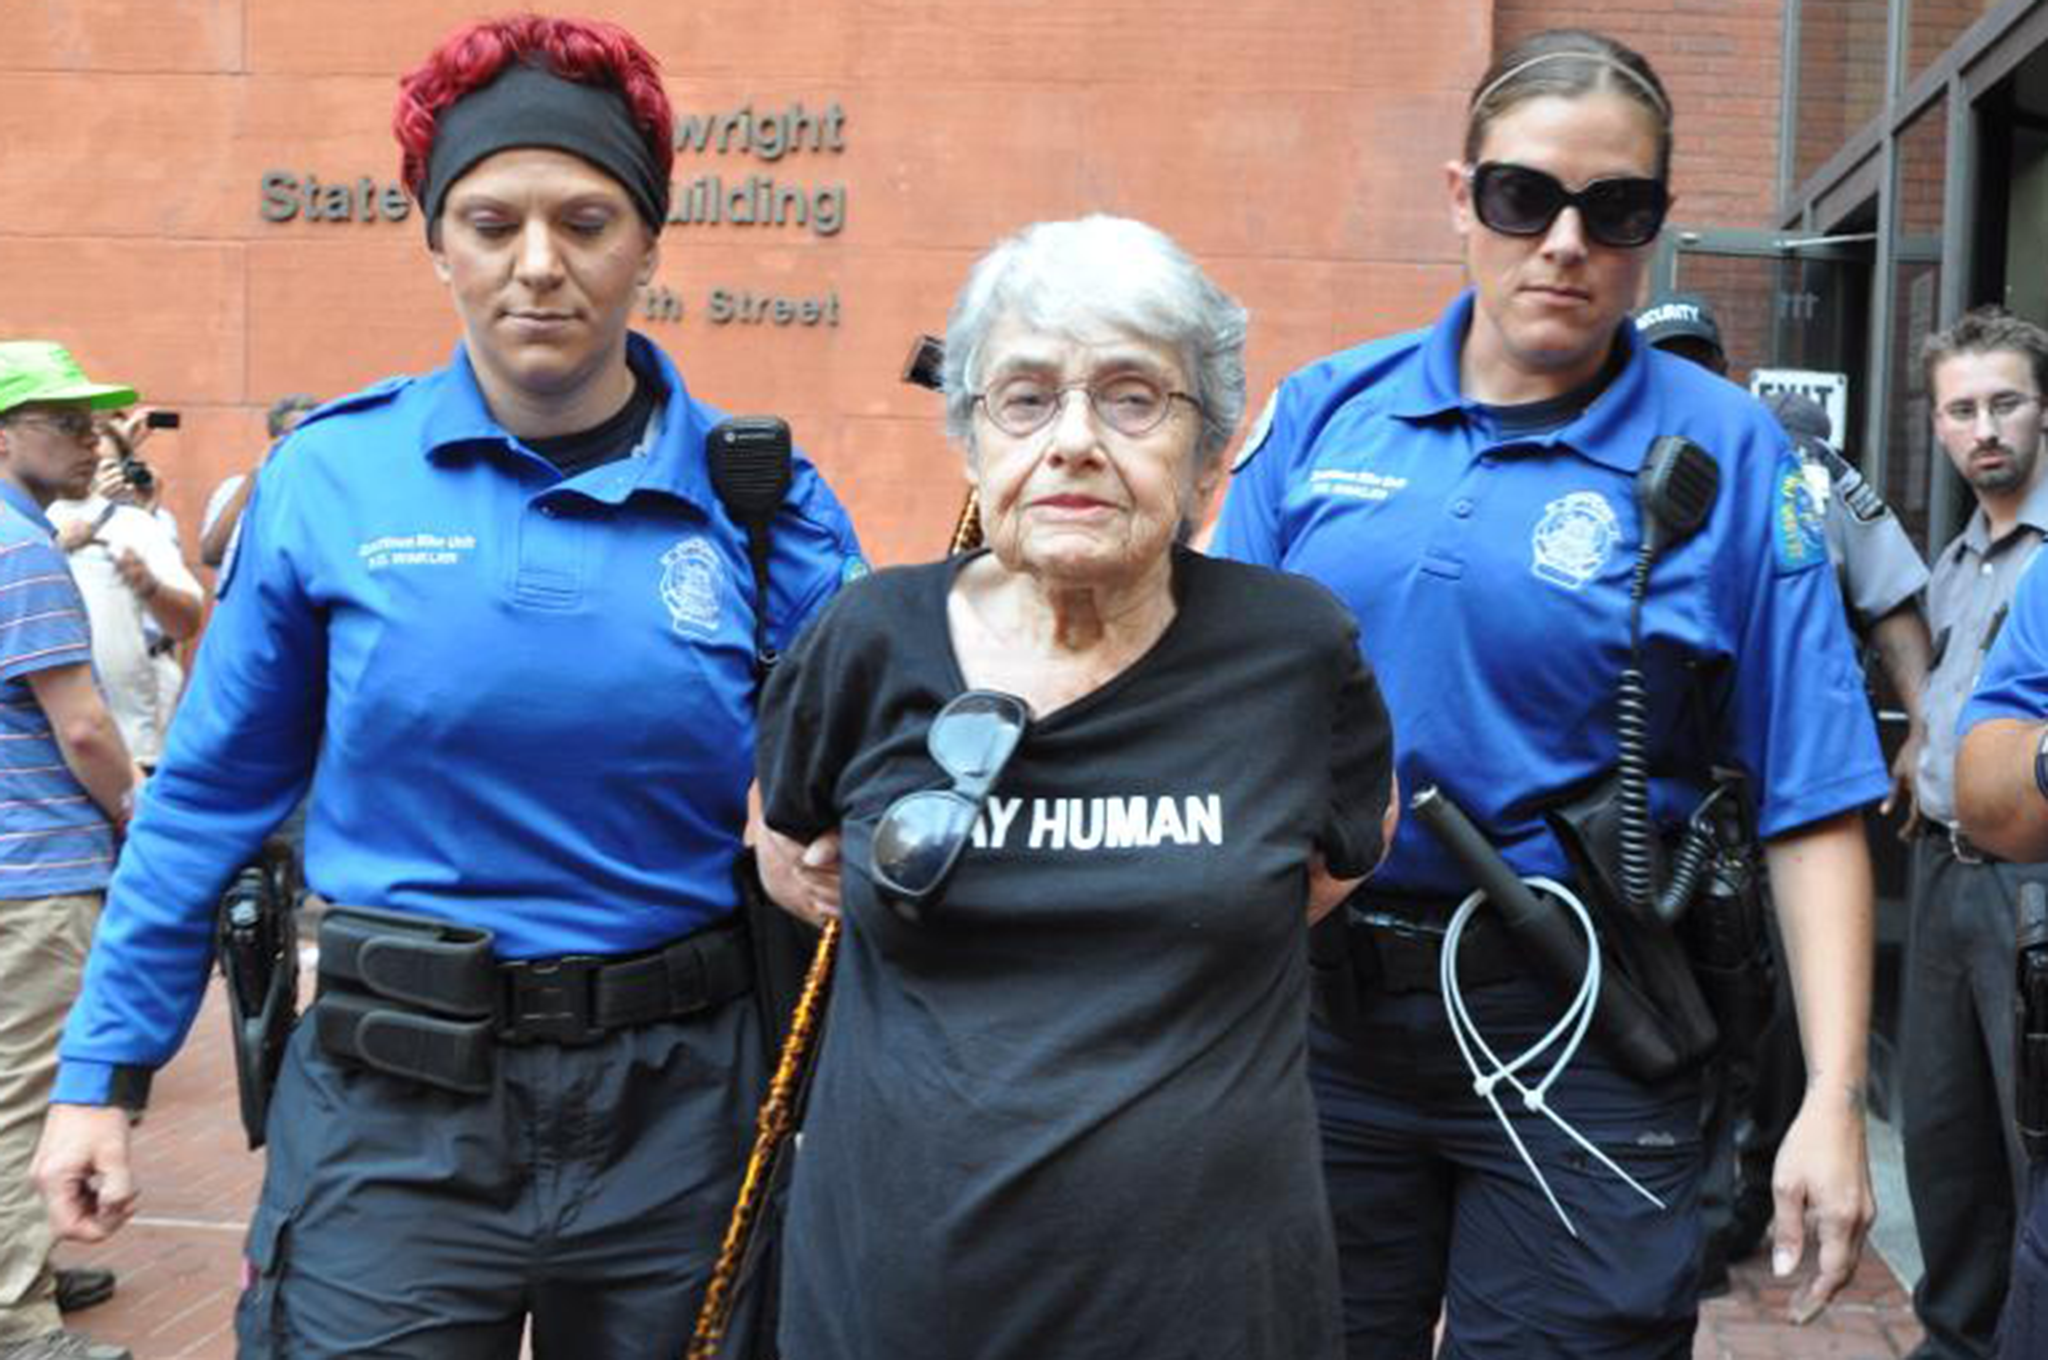 Hedy Epstein, a 90-year-old Holocaust survivor, was among those arrested for blocking the Nixon office building